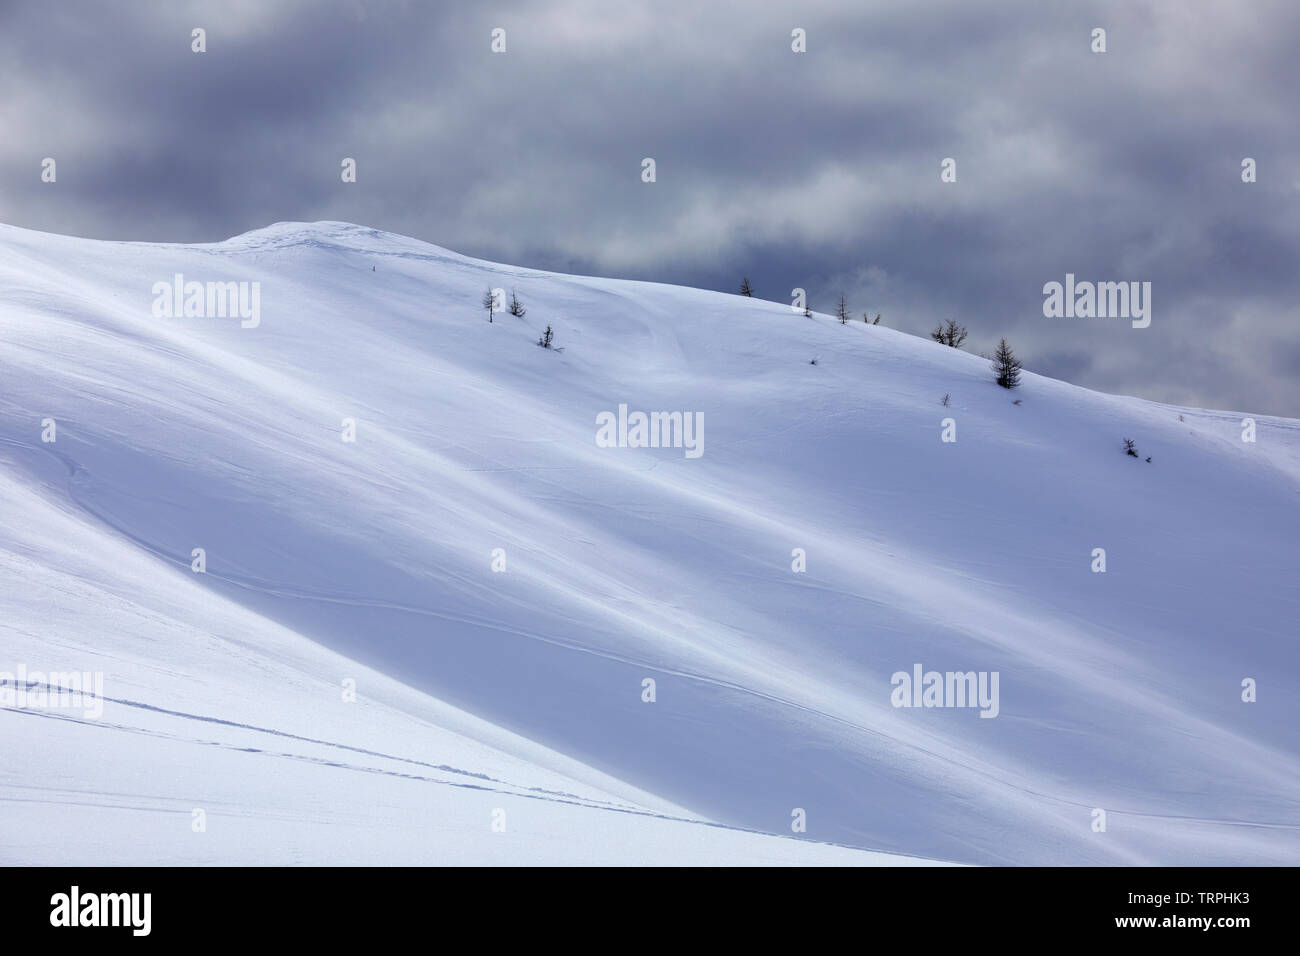 Landscape of Dolomites mountain covered by snow, Belluno province, Italy Stock Photo